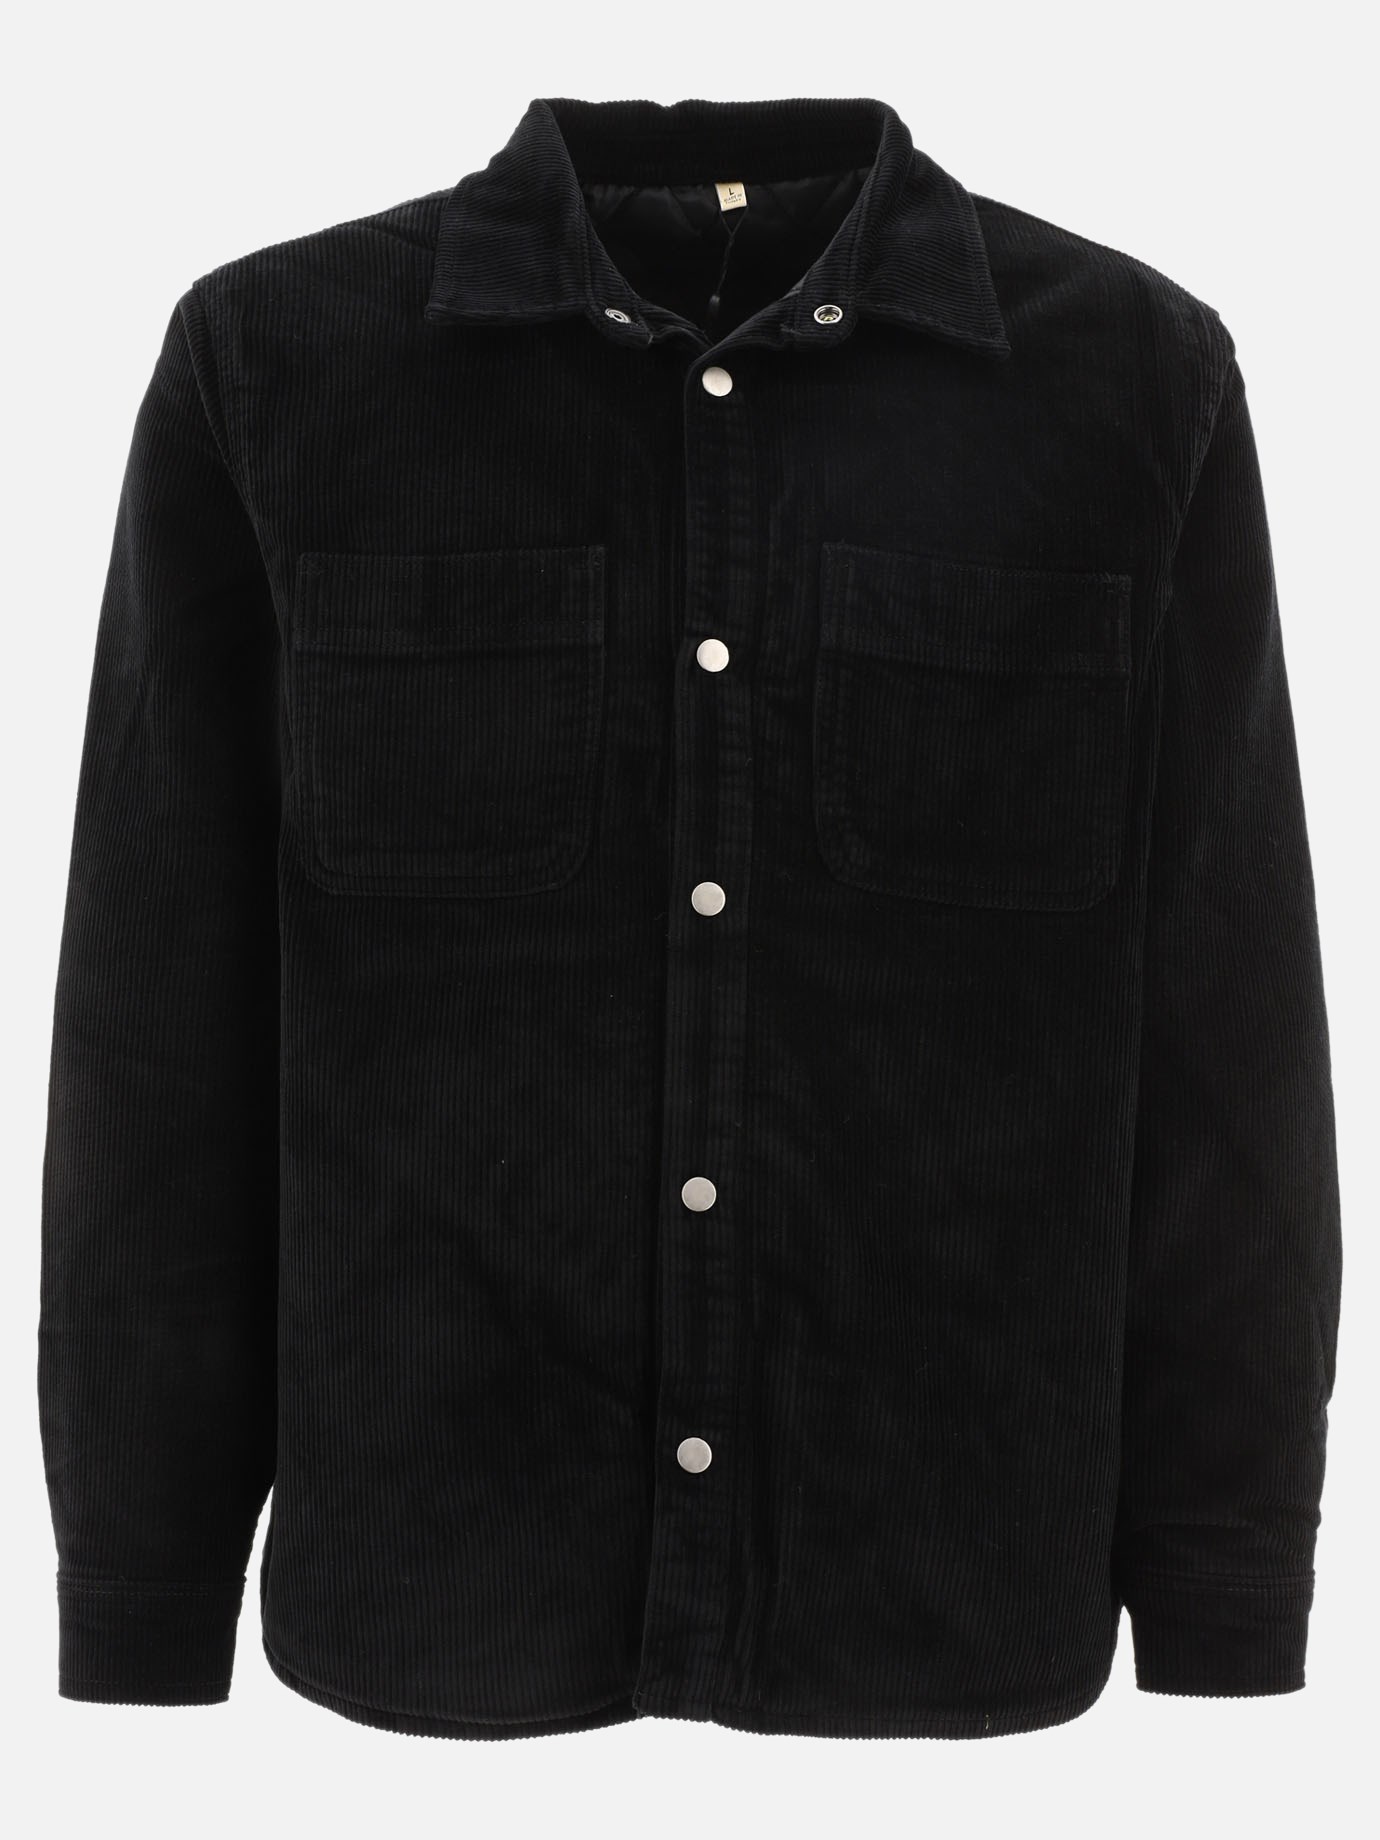 Overshirt  Cord Quilted  by Stüssy